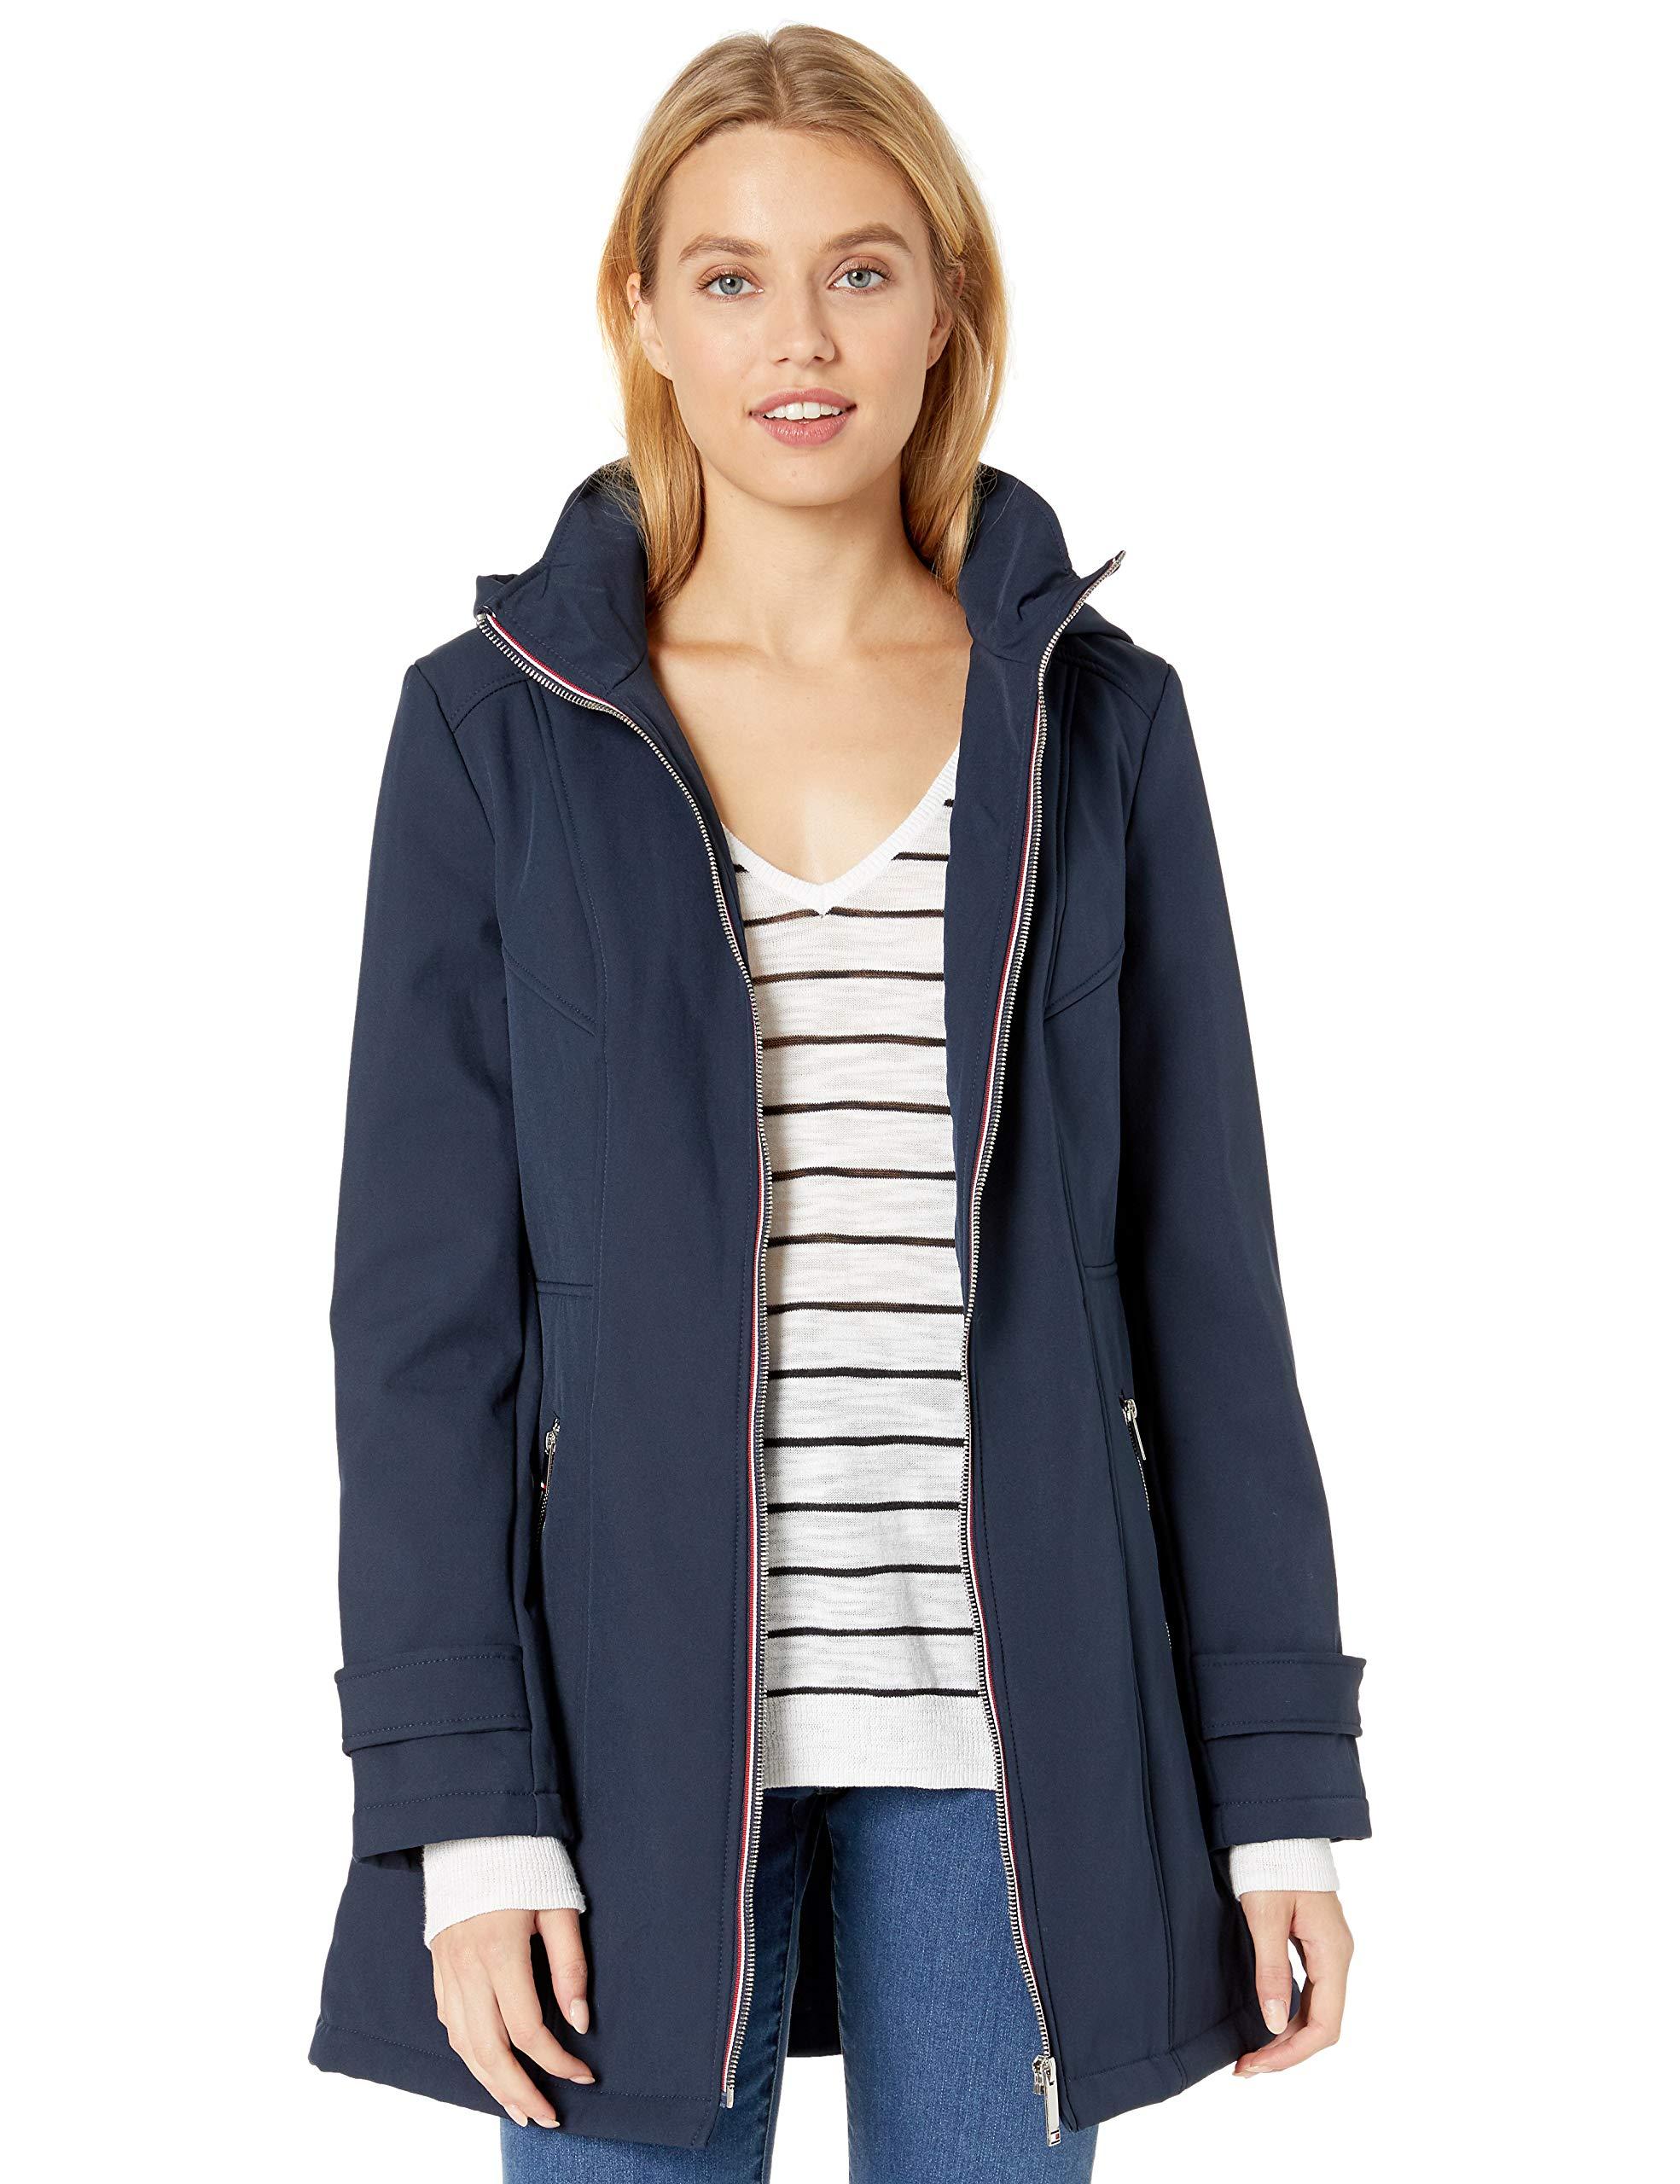 Clancy Zorg liter Tommy Hilfiger Iconic Soft Shell Jacket in Blue | Lyst